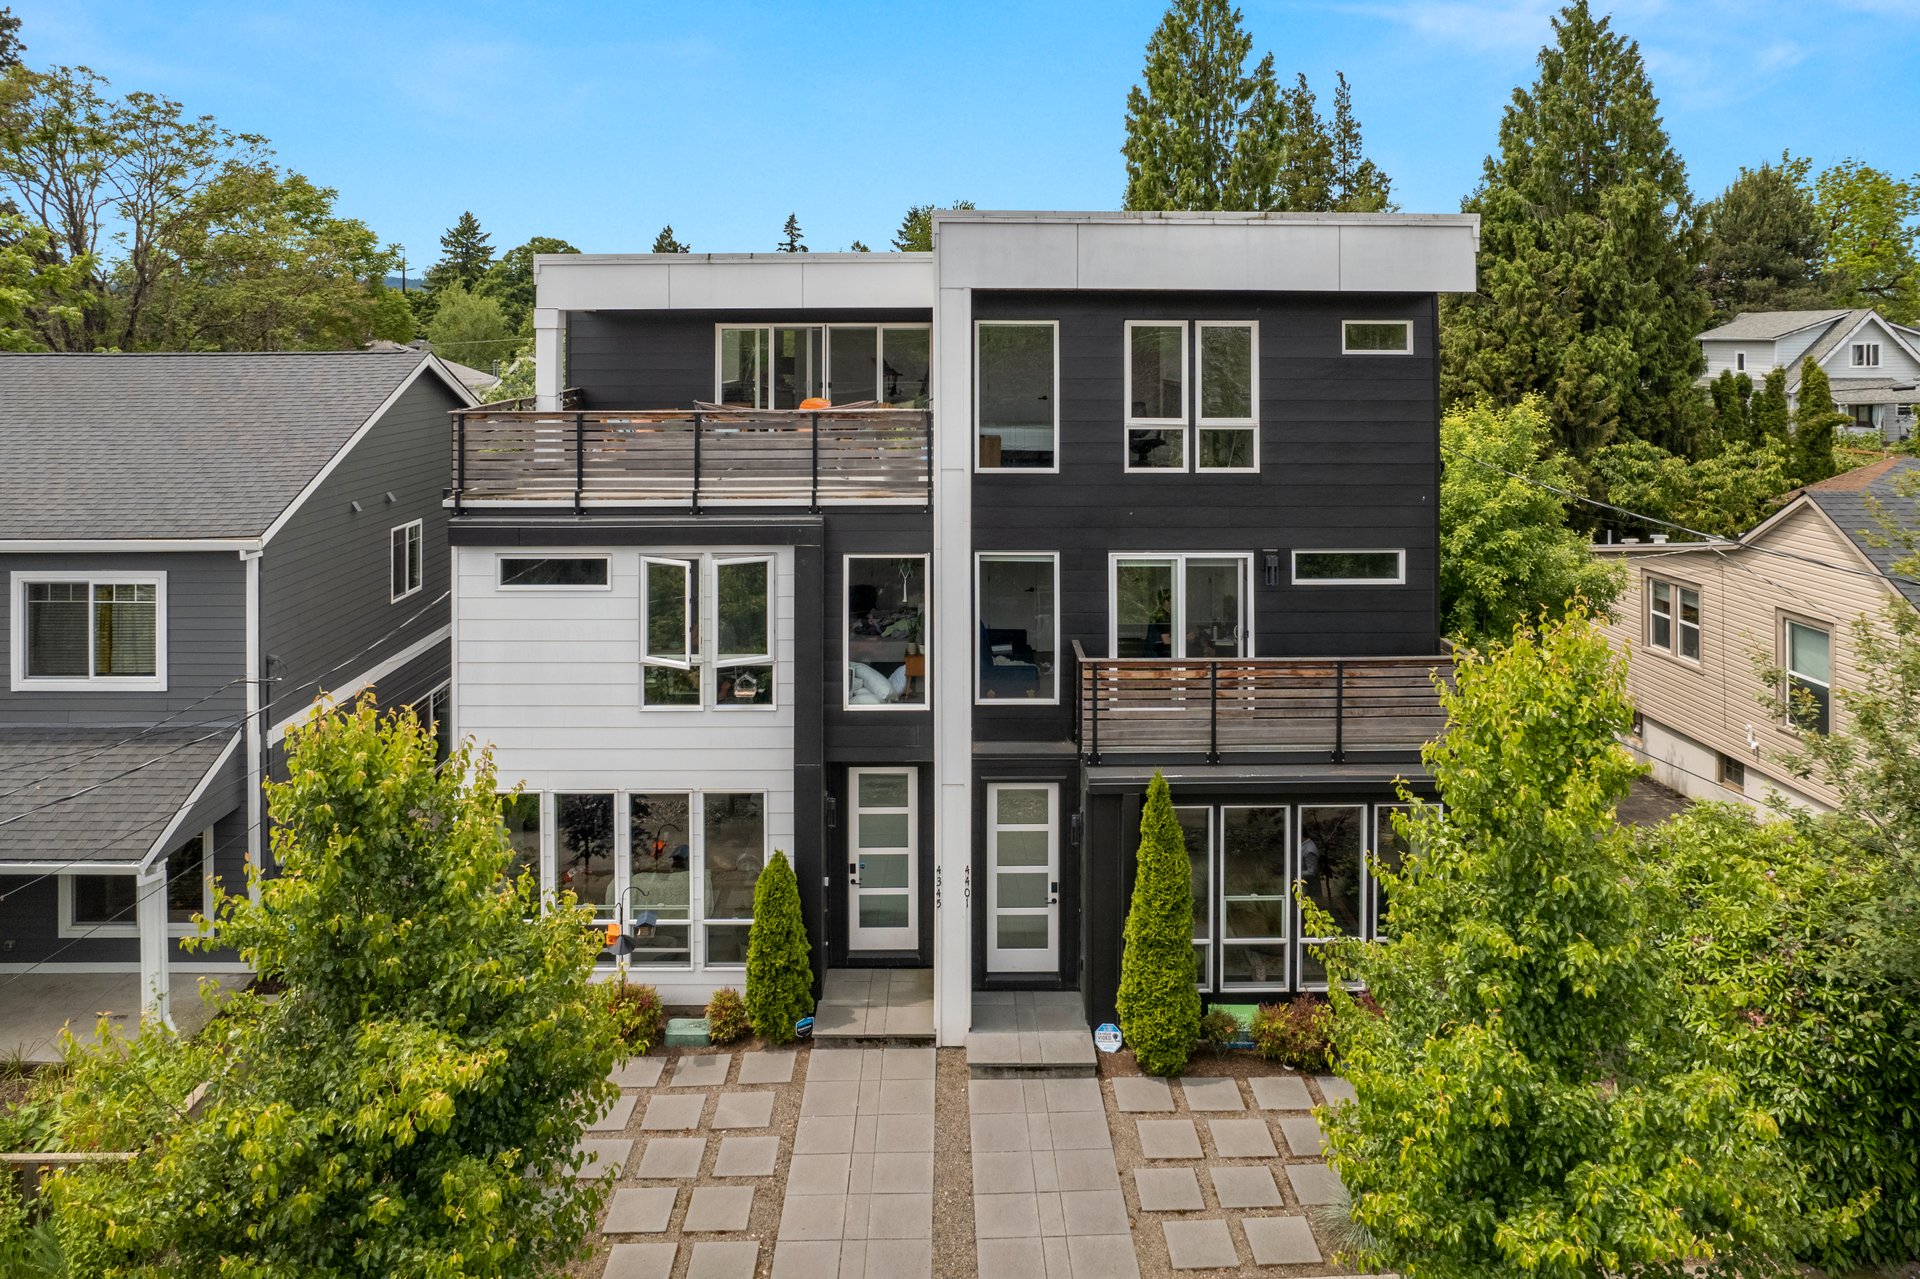 Available Now! 4401 N Haight Ave., Portland 97217 Offered for $975,000